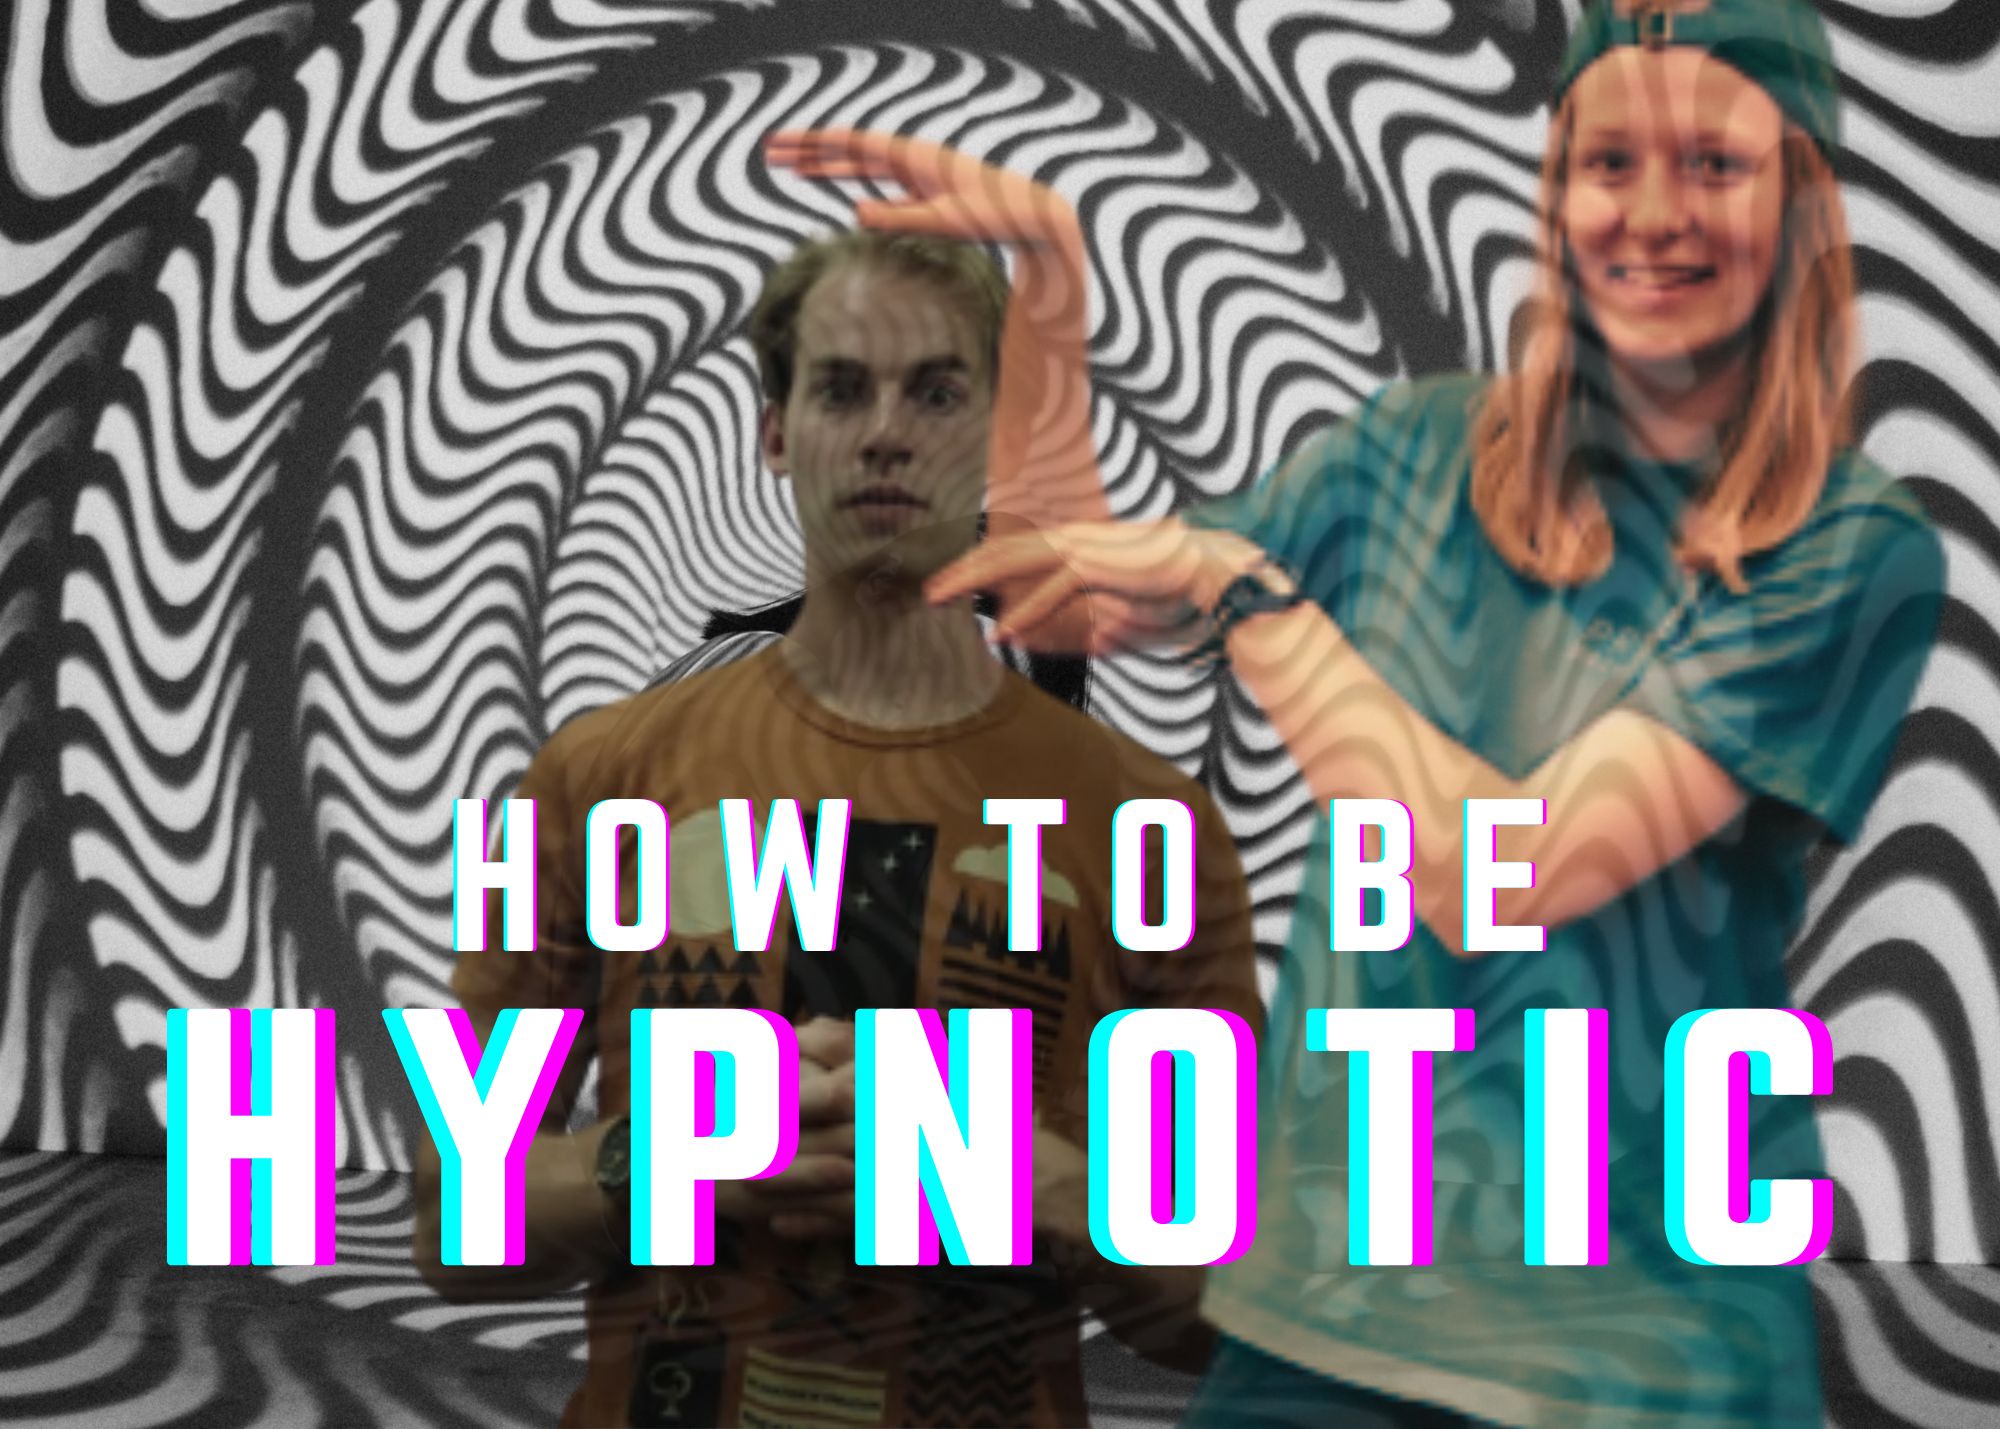 How to be hypnotize